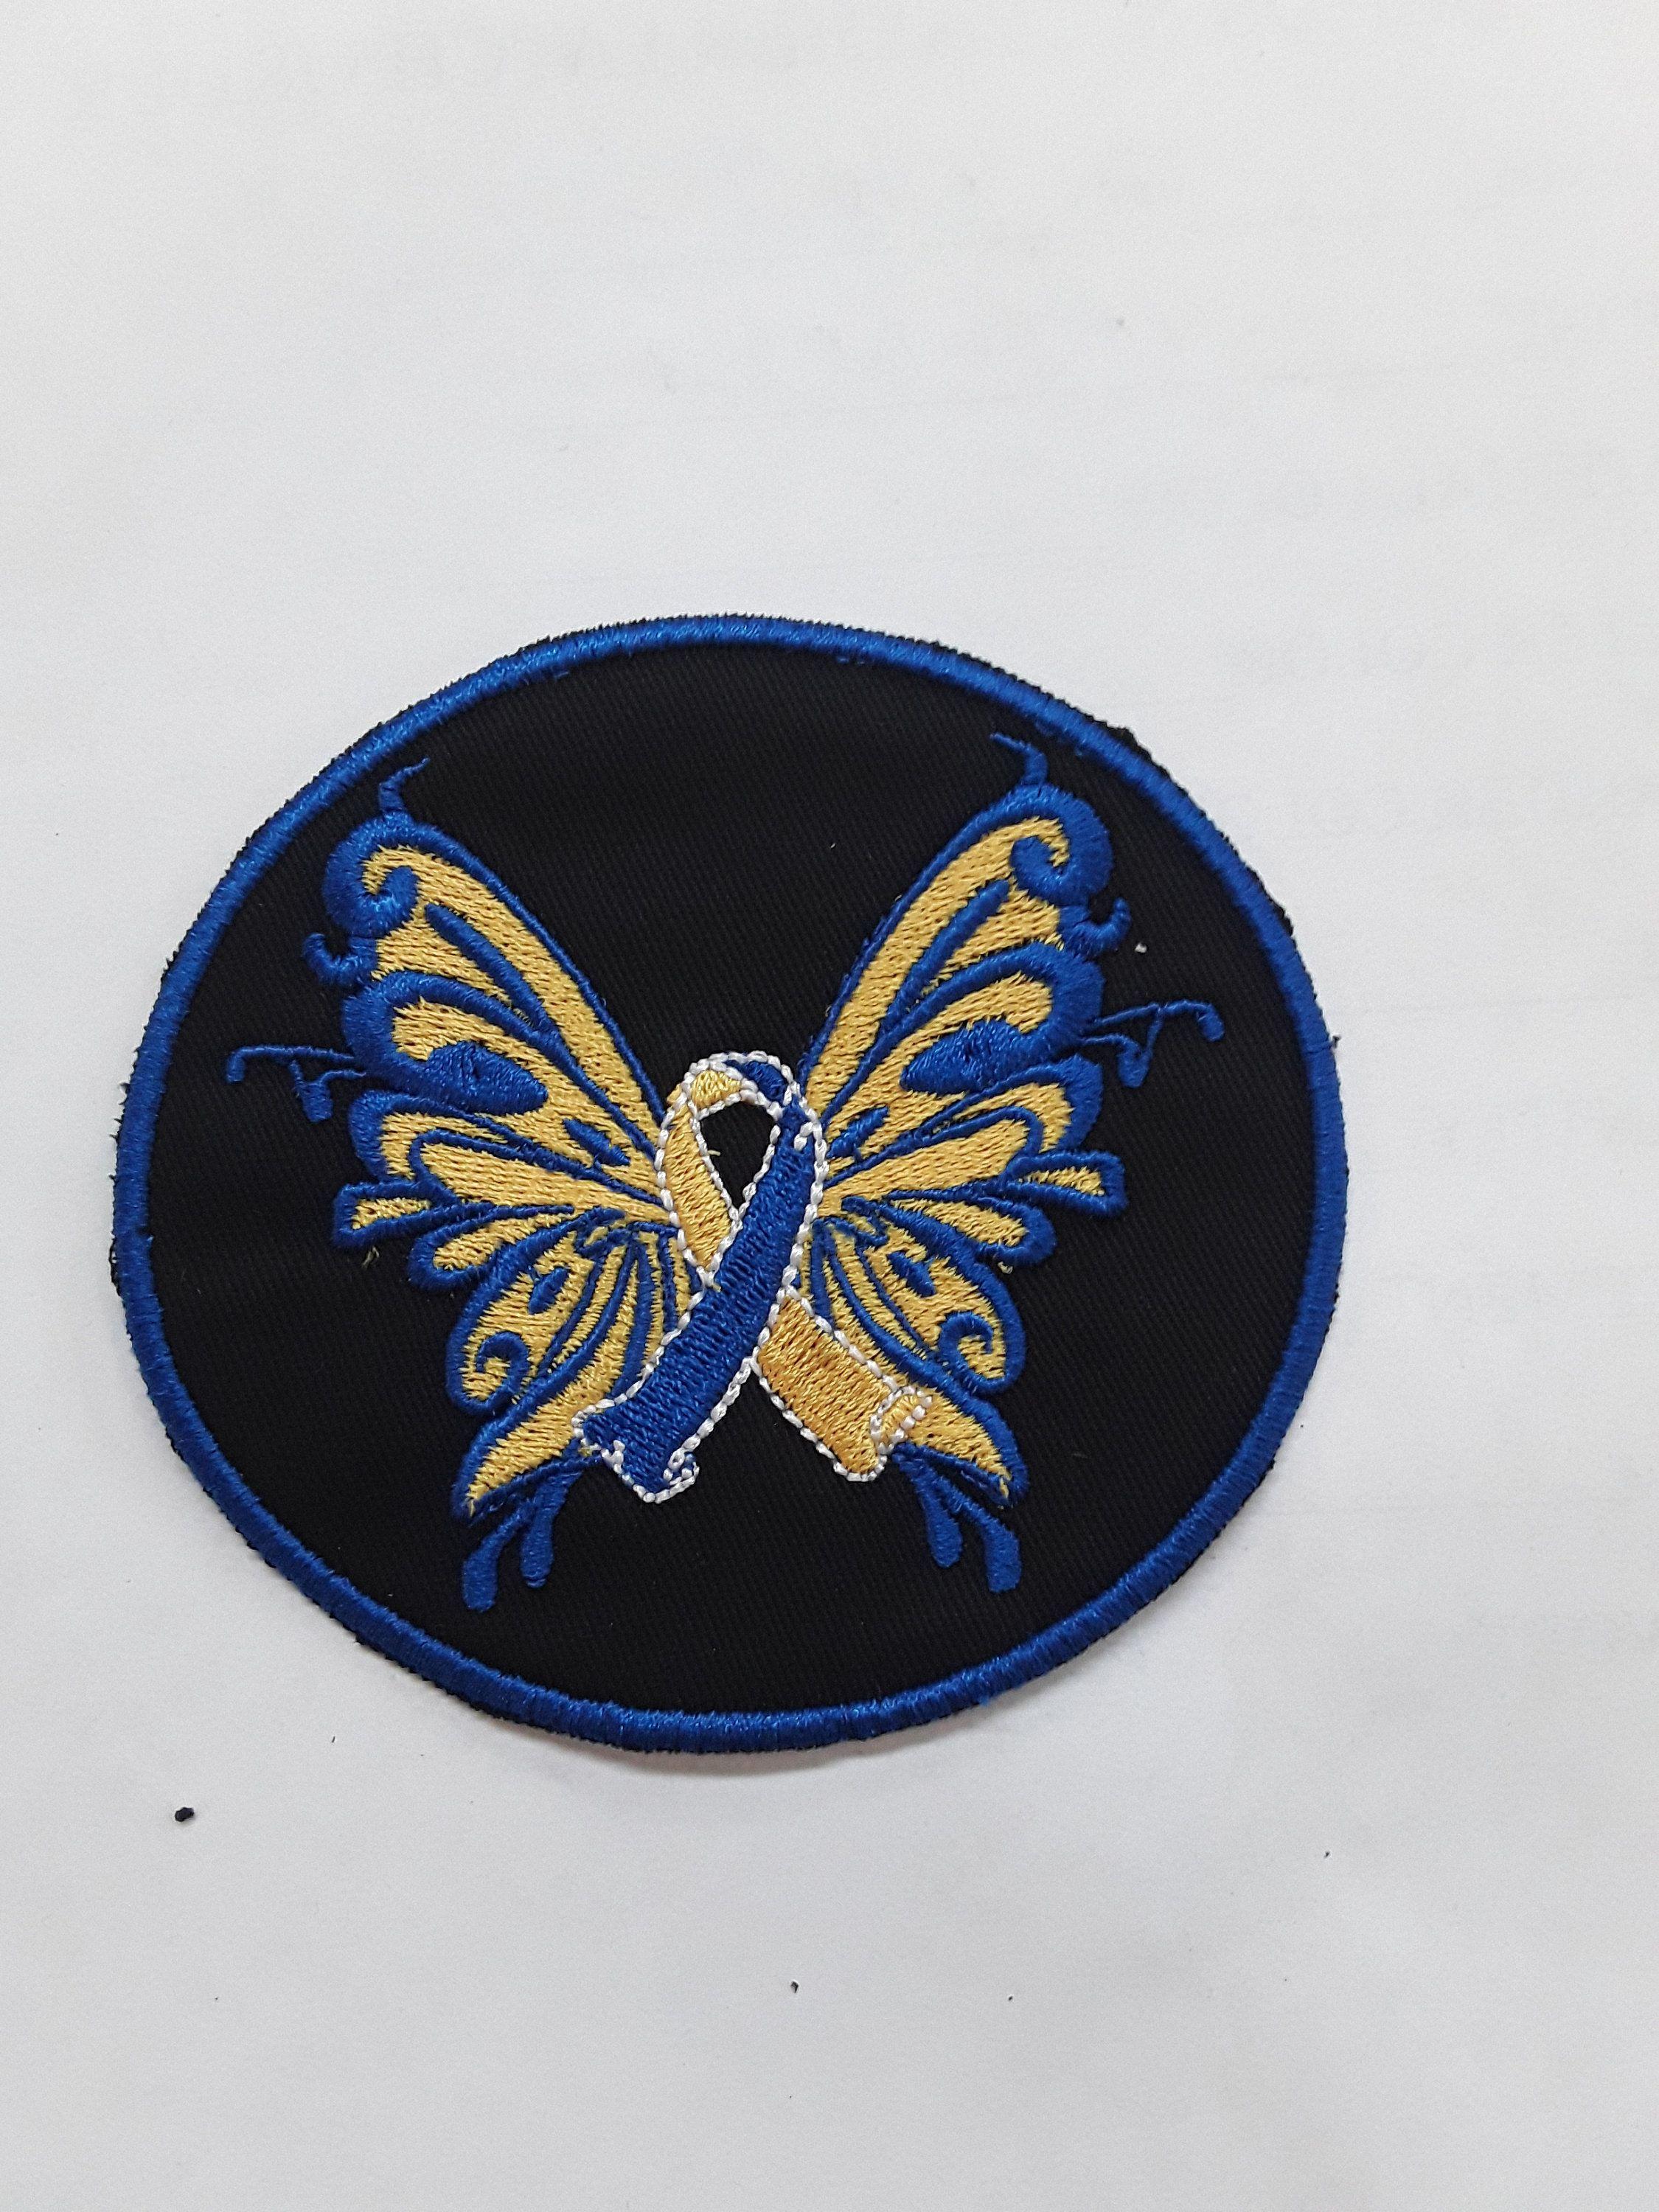 Down Syndrome Butterfly Logo - 3.5 down syndrome butterfly patch